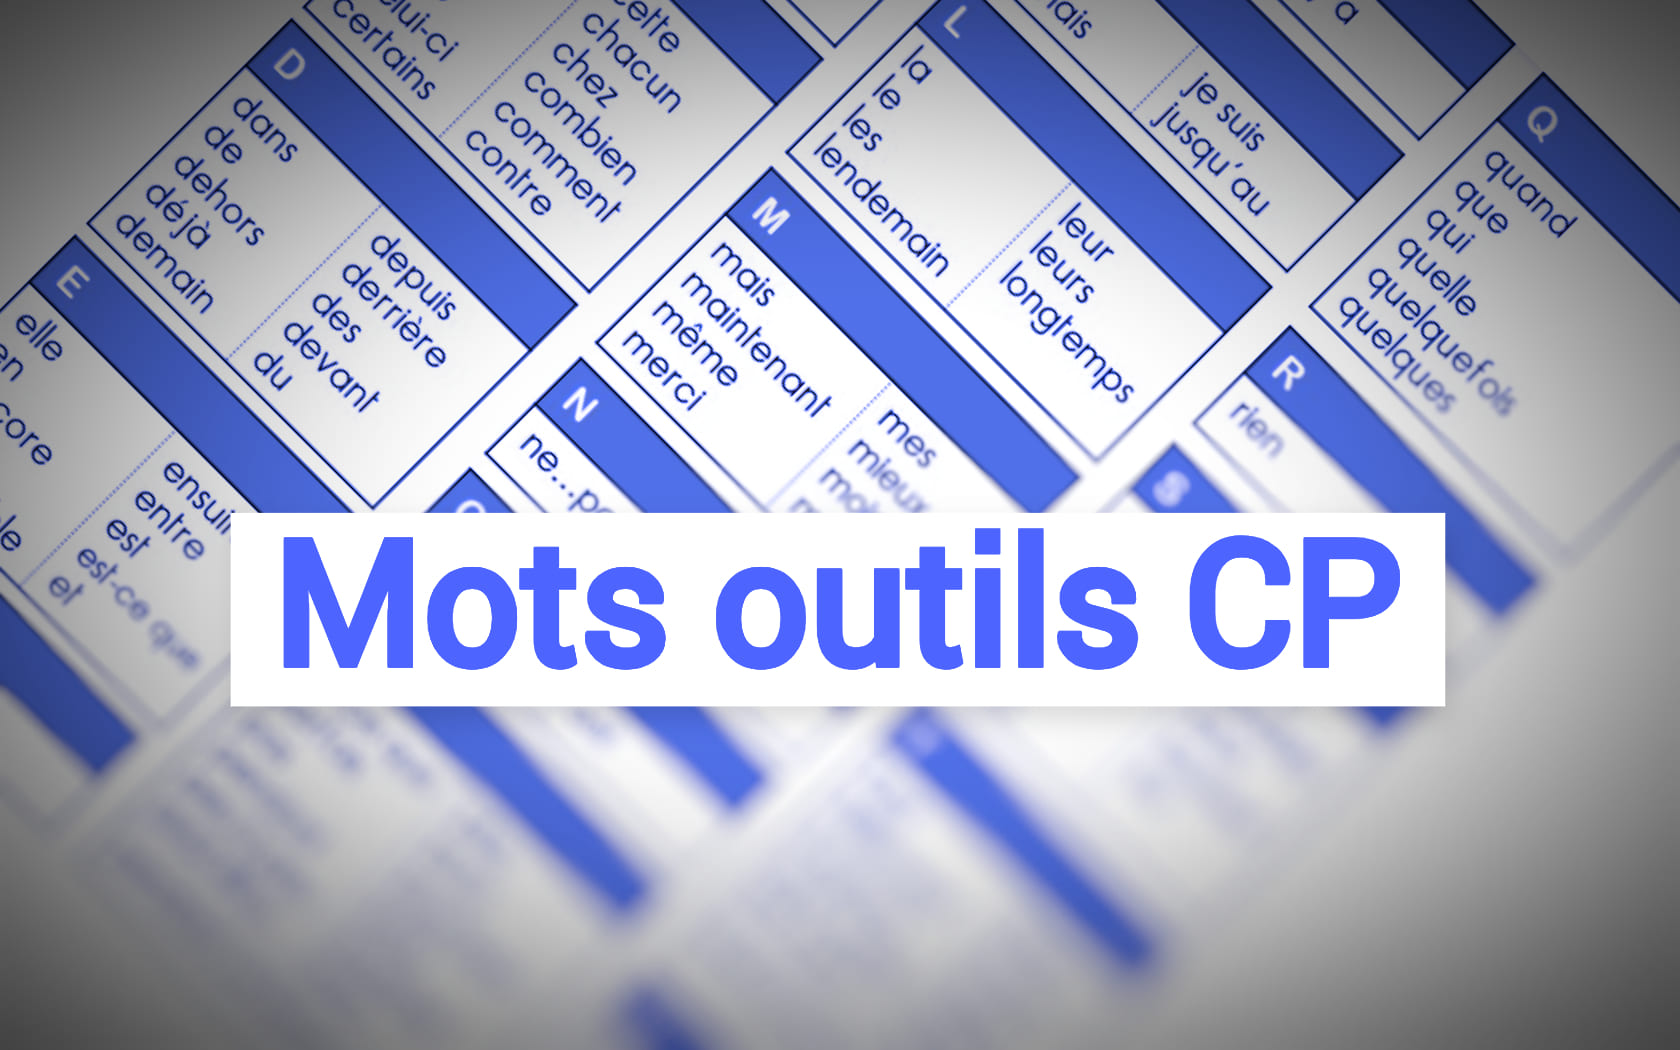 Mots outils CP